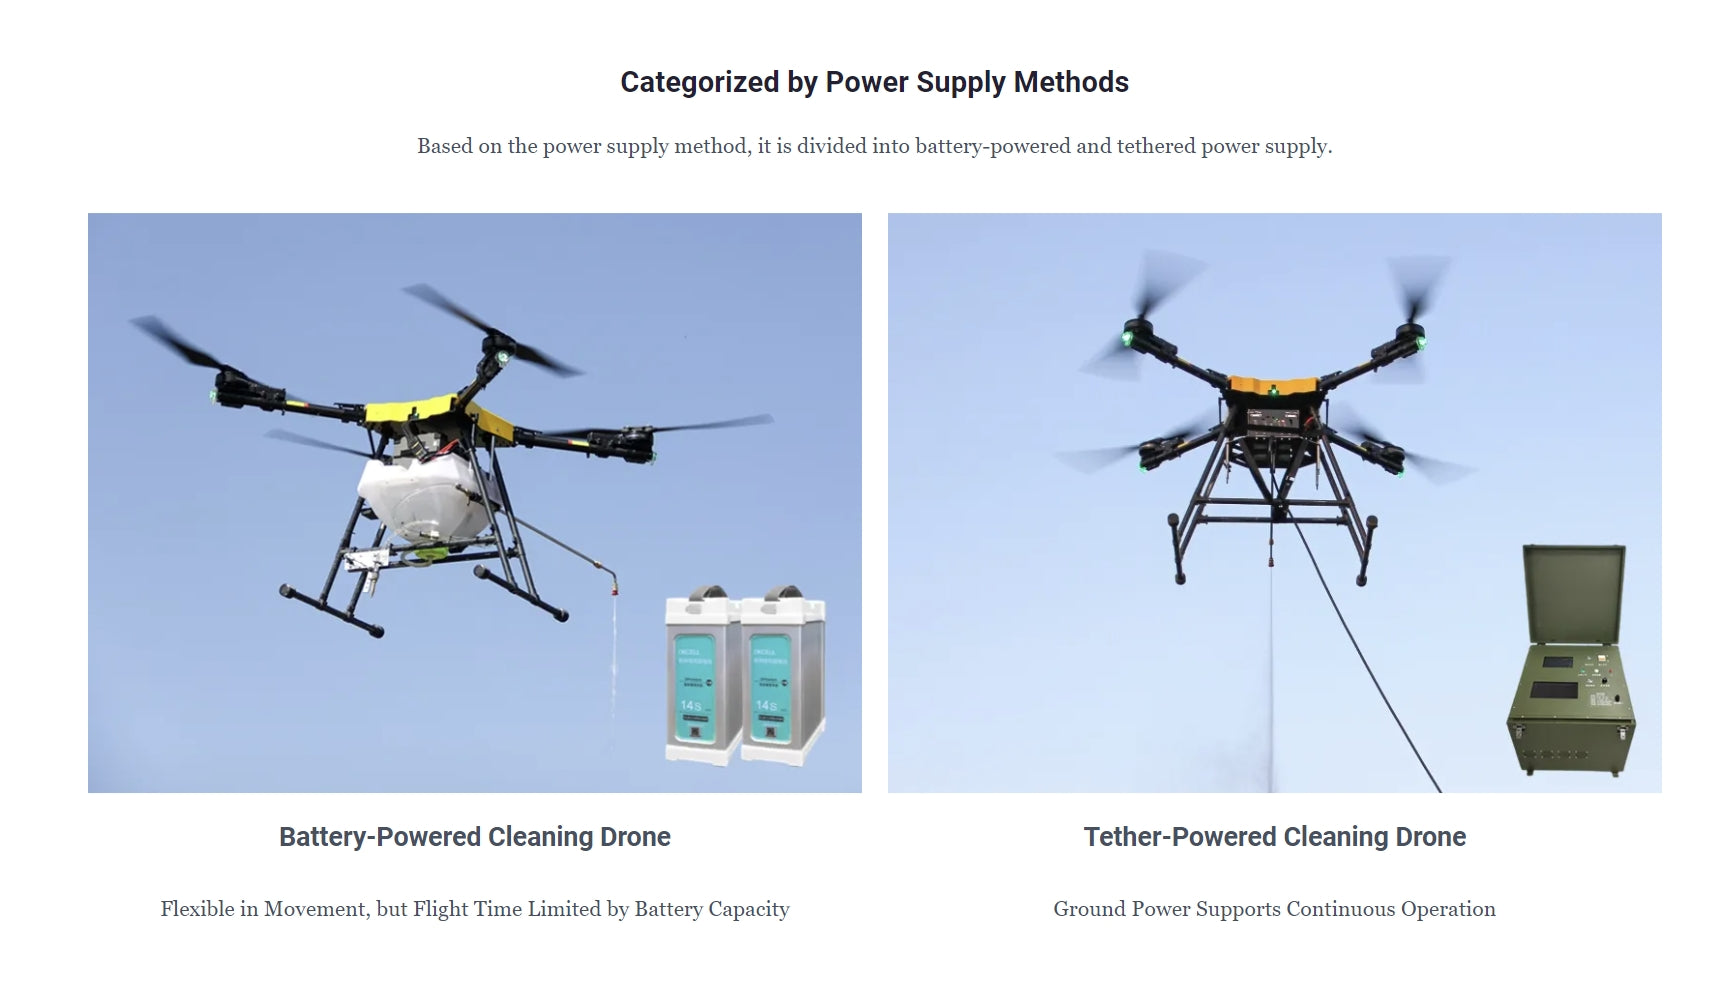 RCDrone, battery-powered and tethered power supply are the two main types of cleaning drone